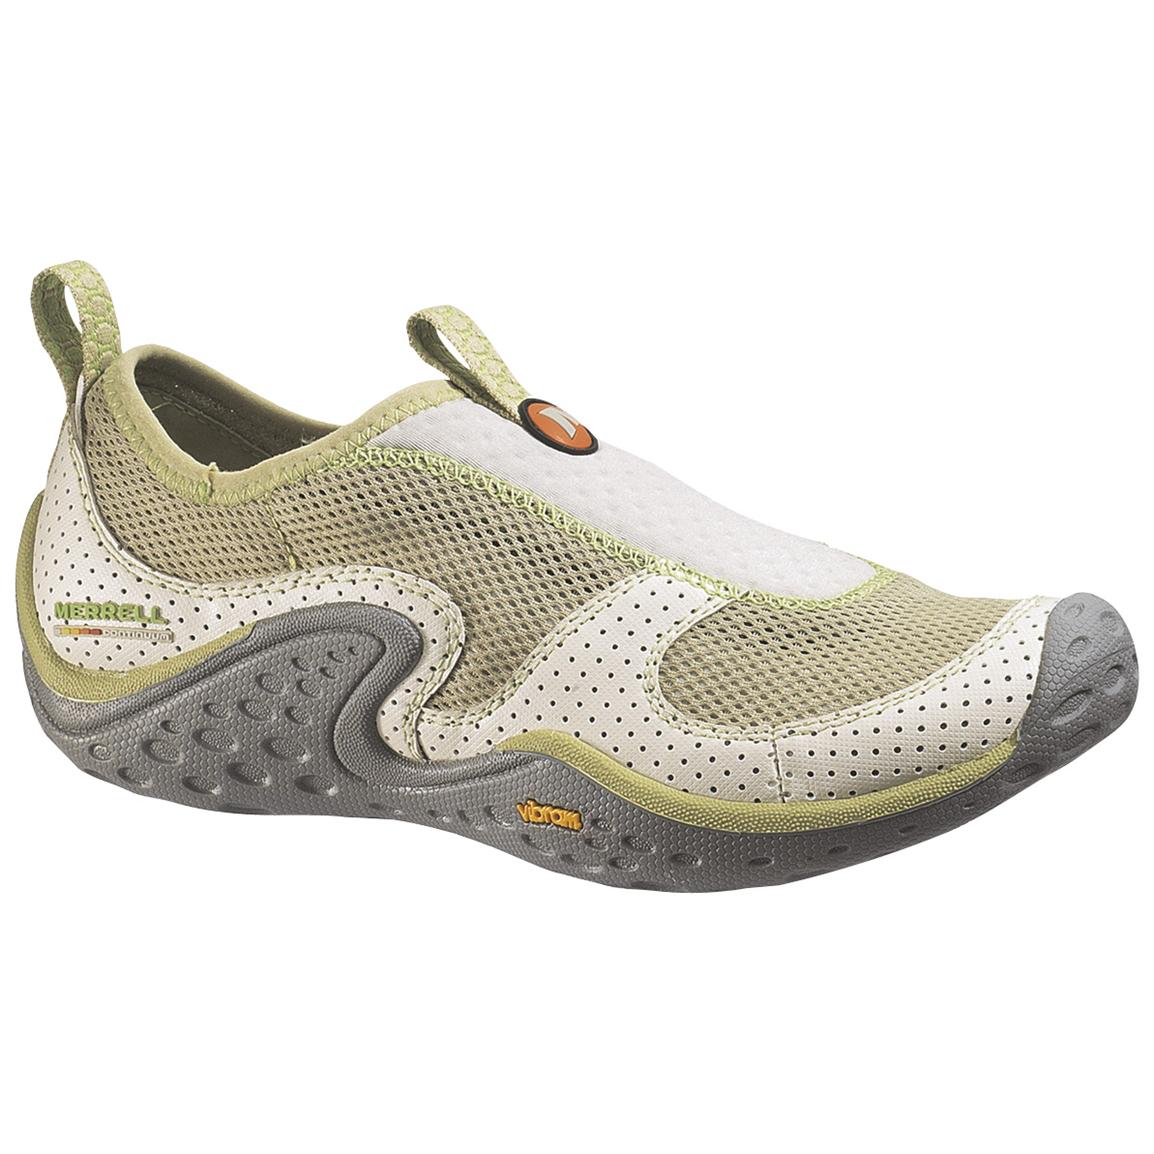 Women's Merrell® Eddy Water Shoes - 177734, Boat & Water Shoes at ...